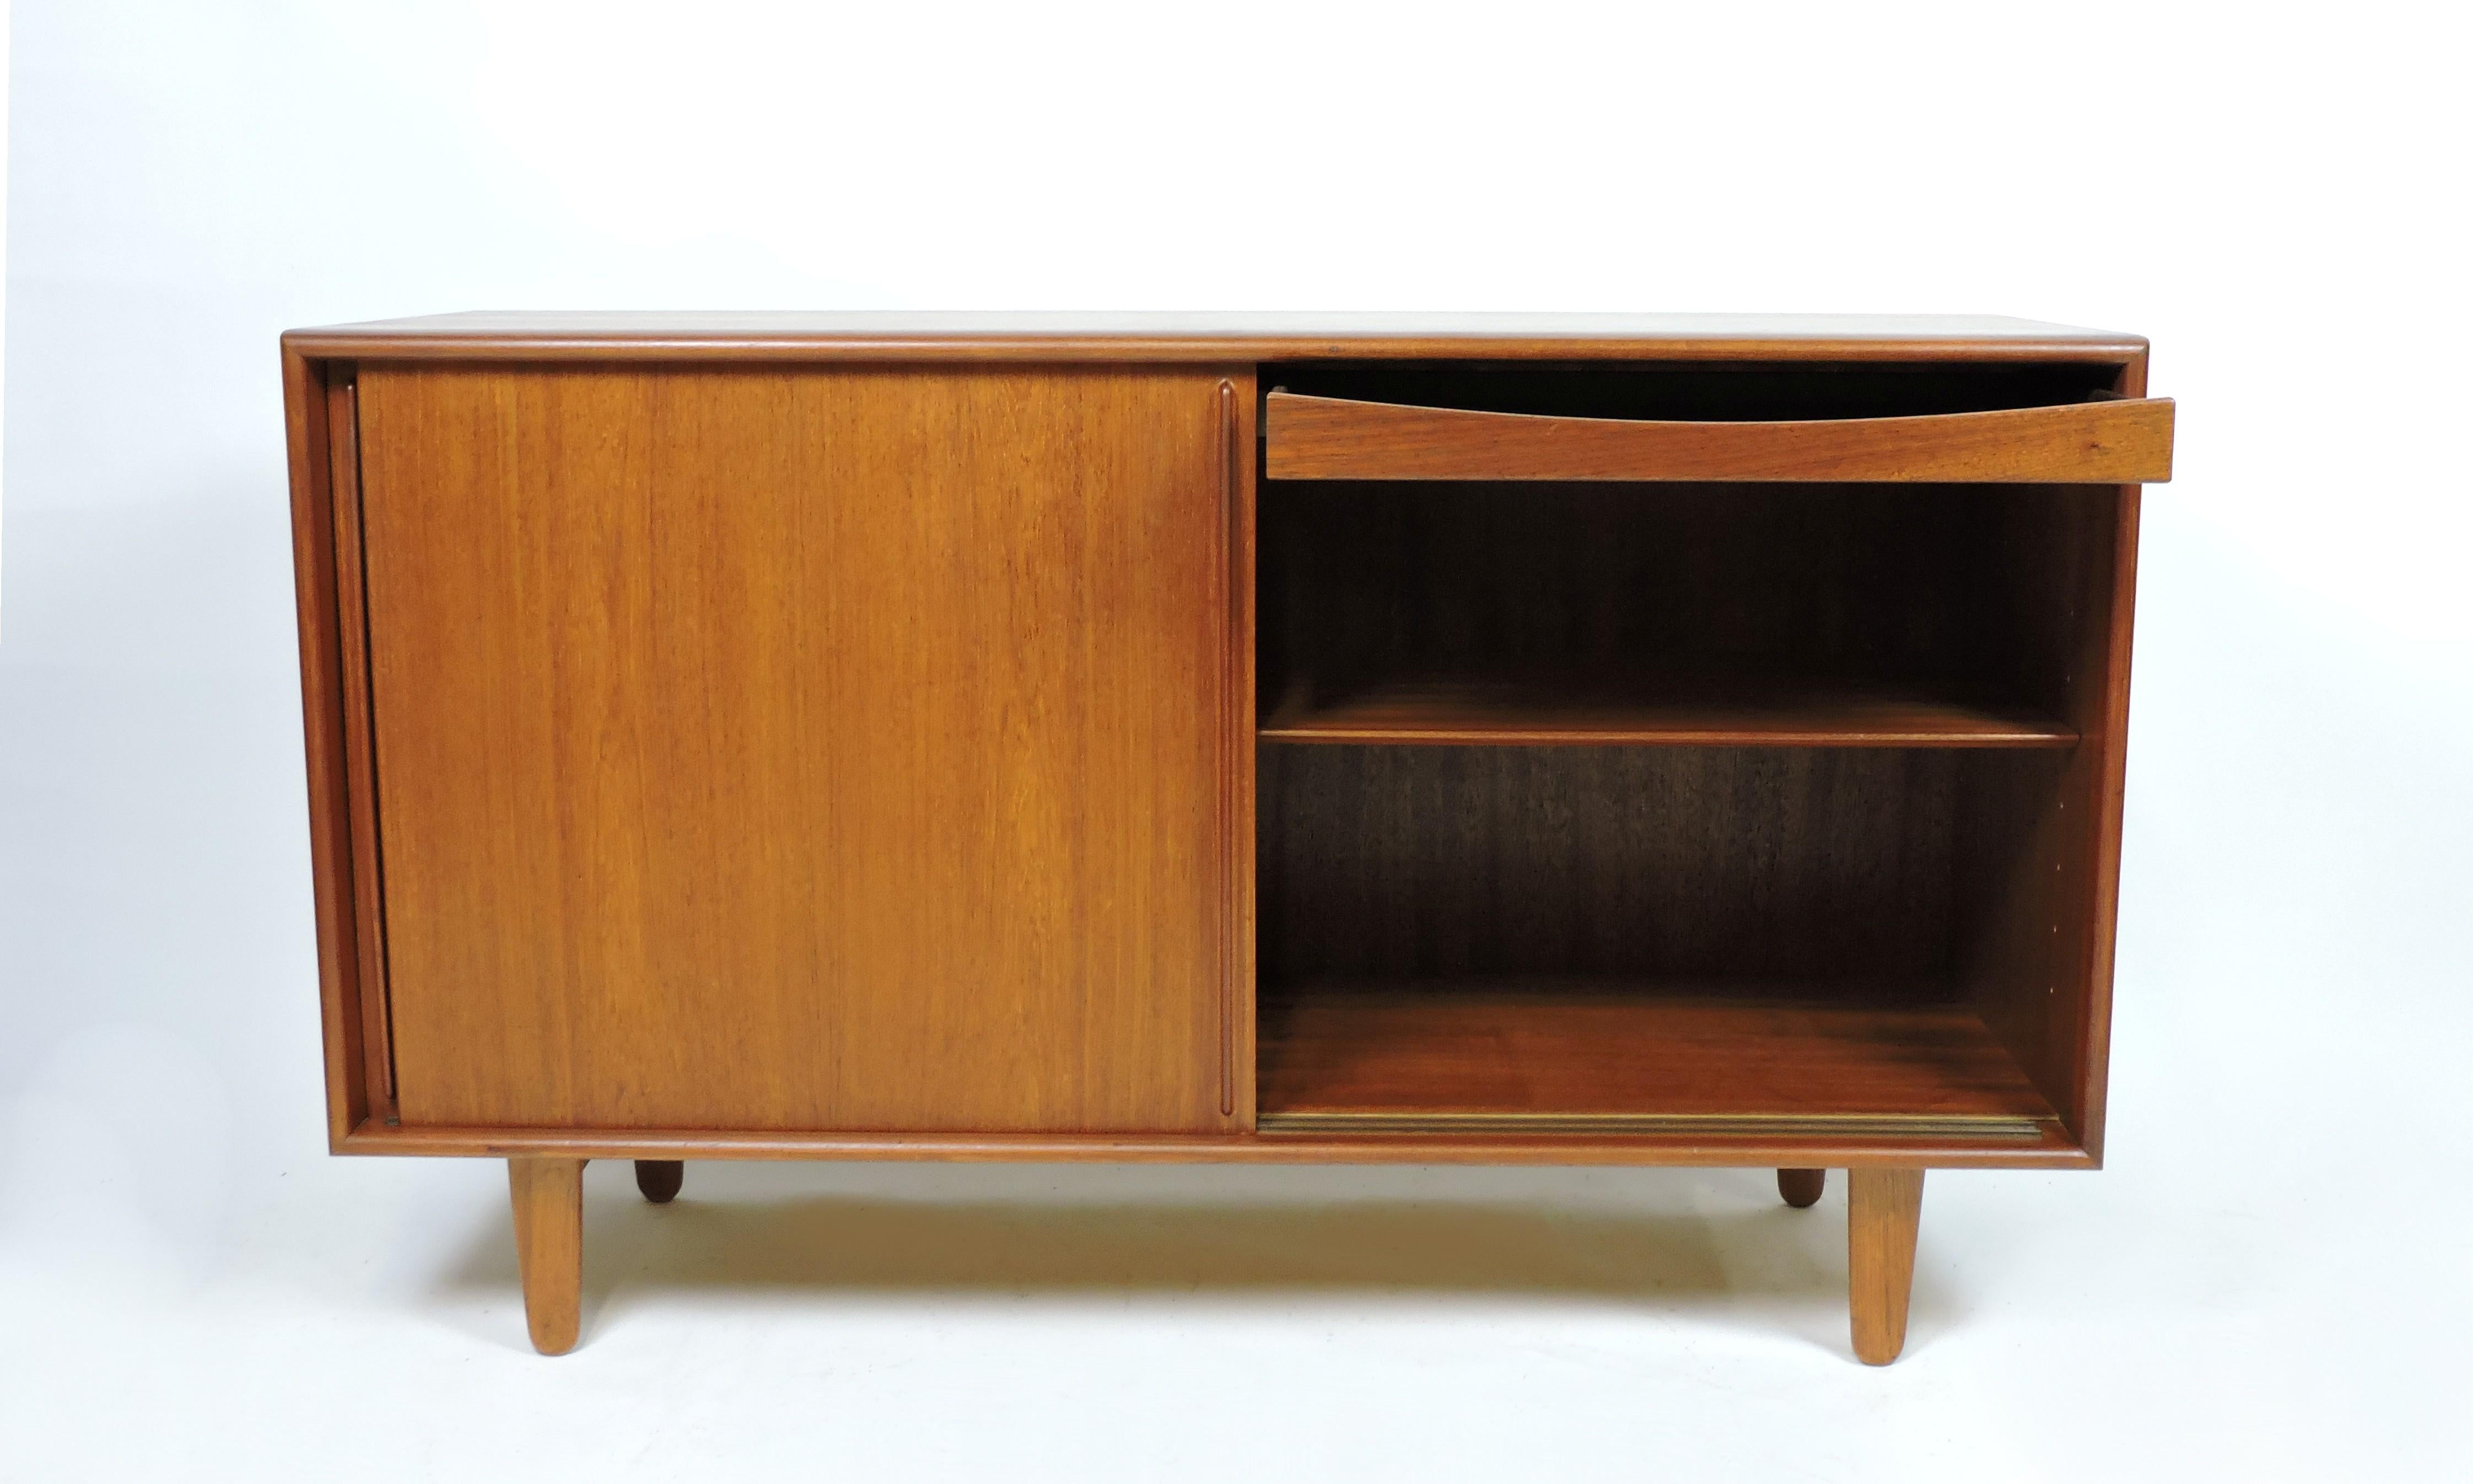 Beautiful Danish modern teak credenza designed by Svend Aage Madsen and made in Denmark by Falster Mobelfabrik. This cabinet has 2 sliding doors, behind which are 2 compartments with 3 adjustable shelves and a felt lined drawer for lots of storage